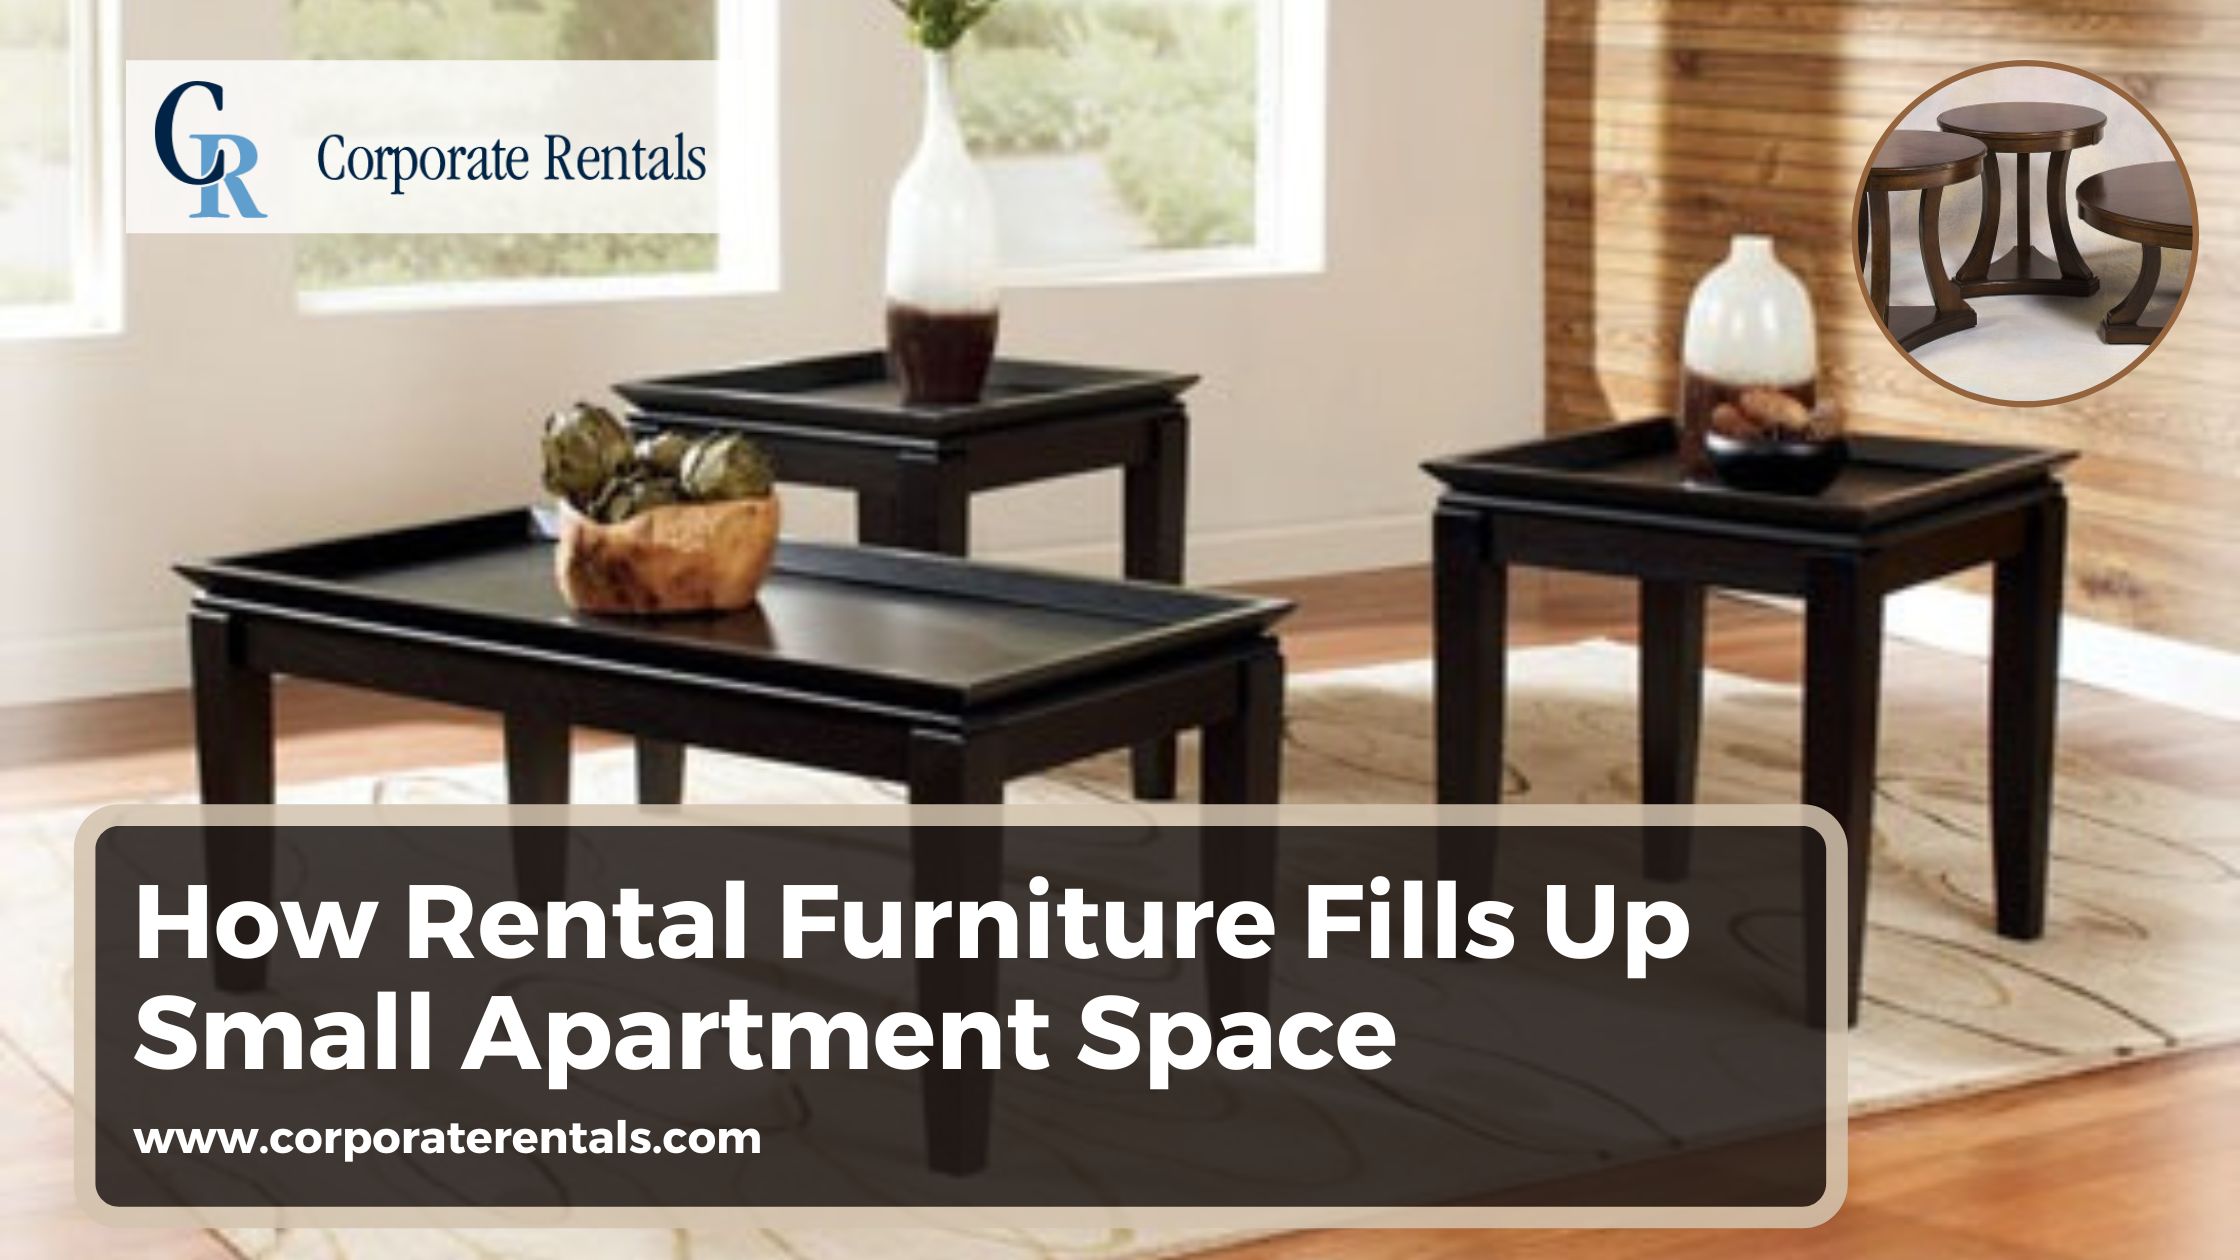 How Rental Furniture Fills Up Small Apartment Space?